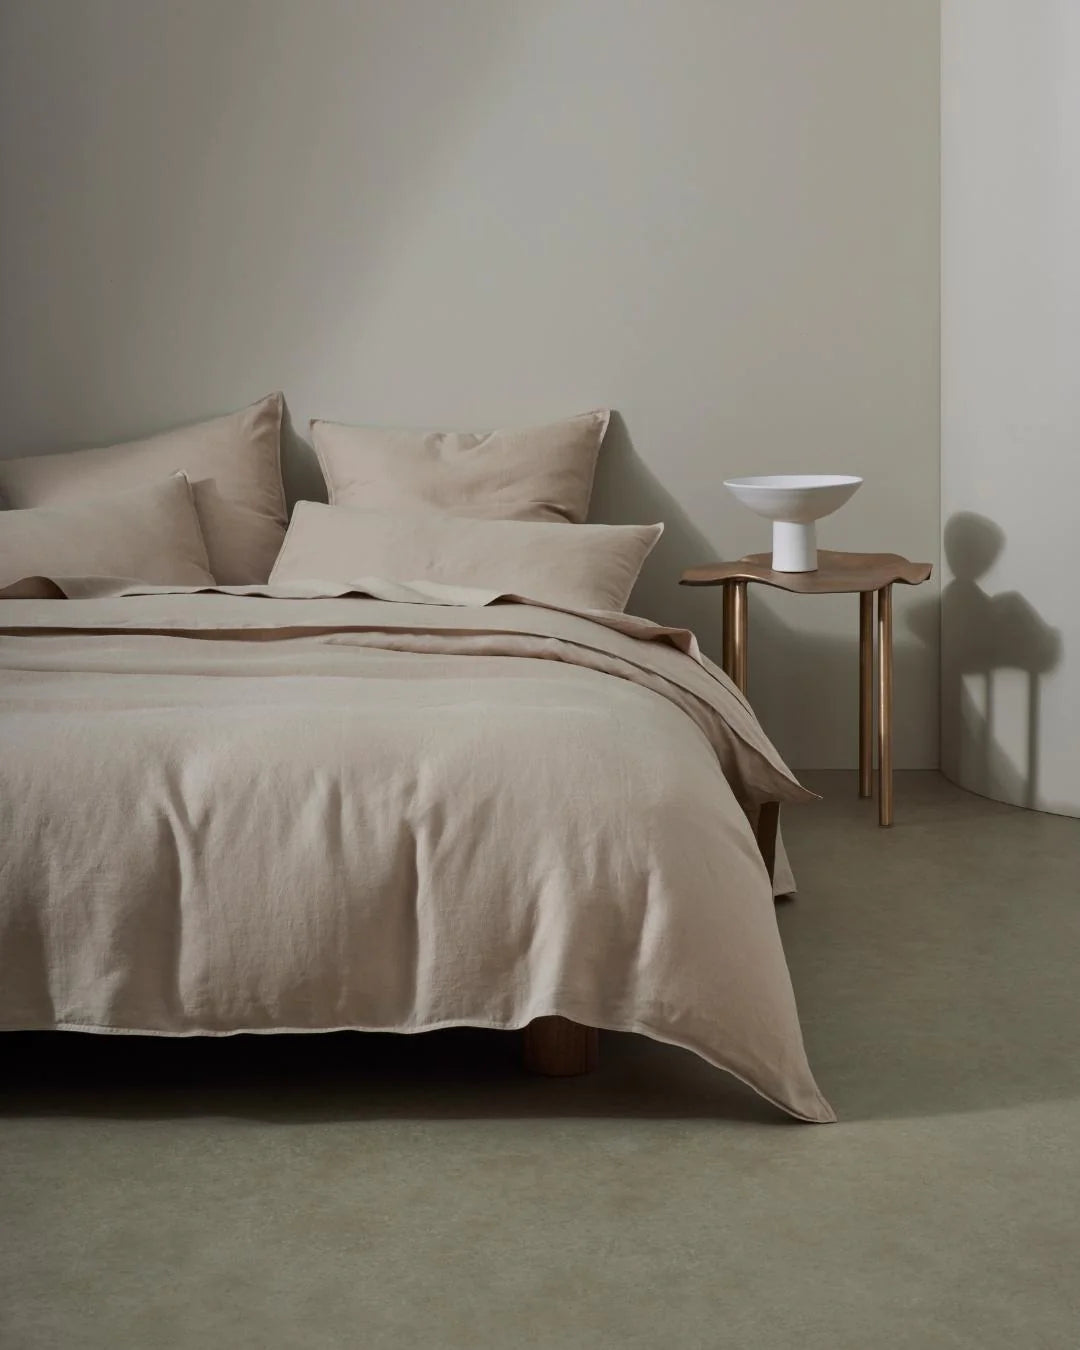 Crafted from the highest quality French Flax Linen, each product from the Ravello range is prewashed and aero finished for a unique and luxuriously soft, relaxed feel, making it a dream to rest and relax in.  The Shell colourway is a soft, sandy beige that will add a touch of warmth and sheer colour to a bedroom — perfect for any neutral lover.